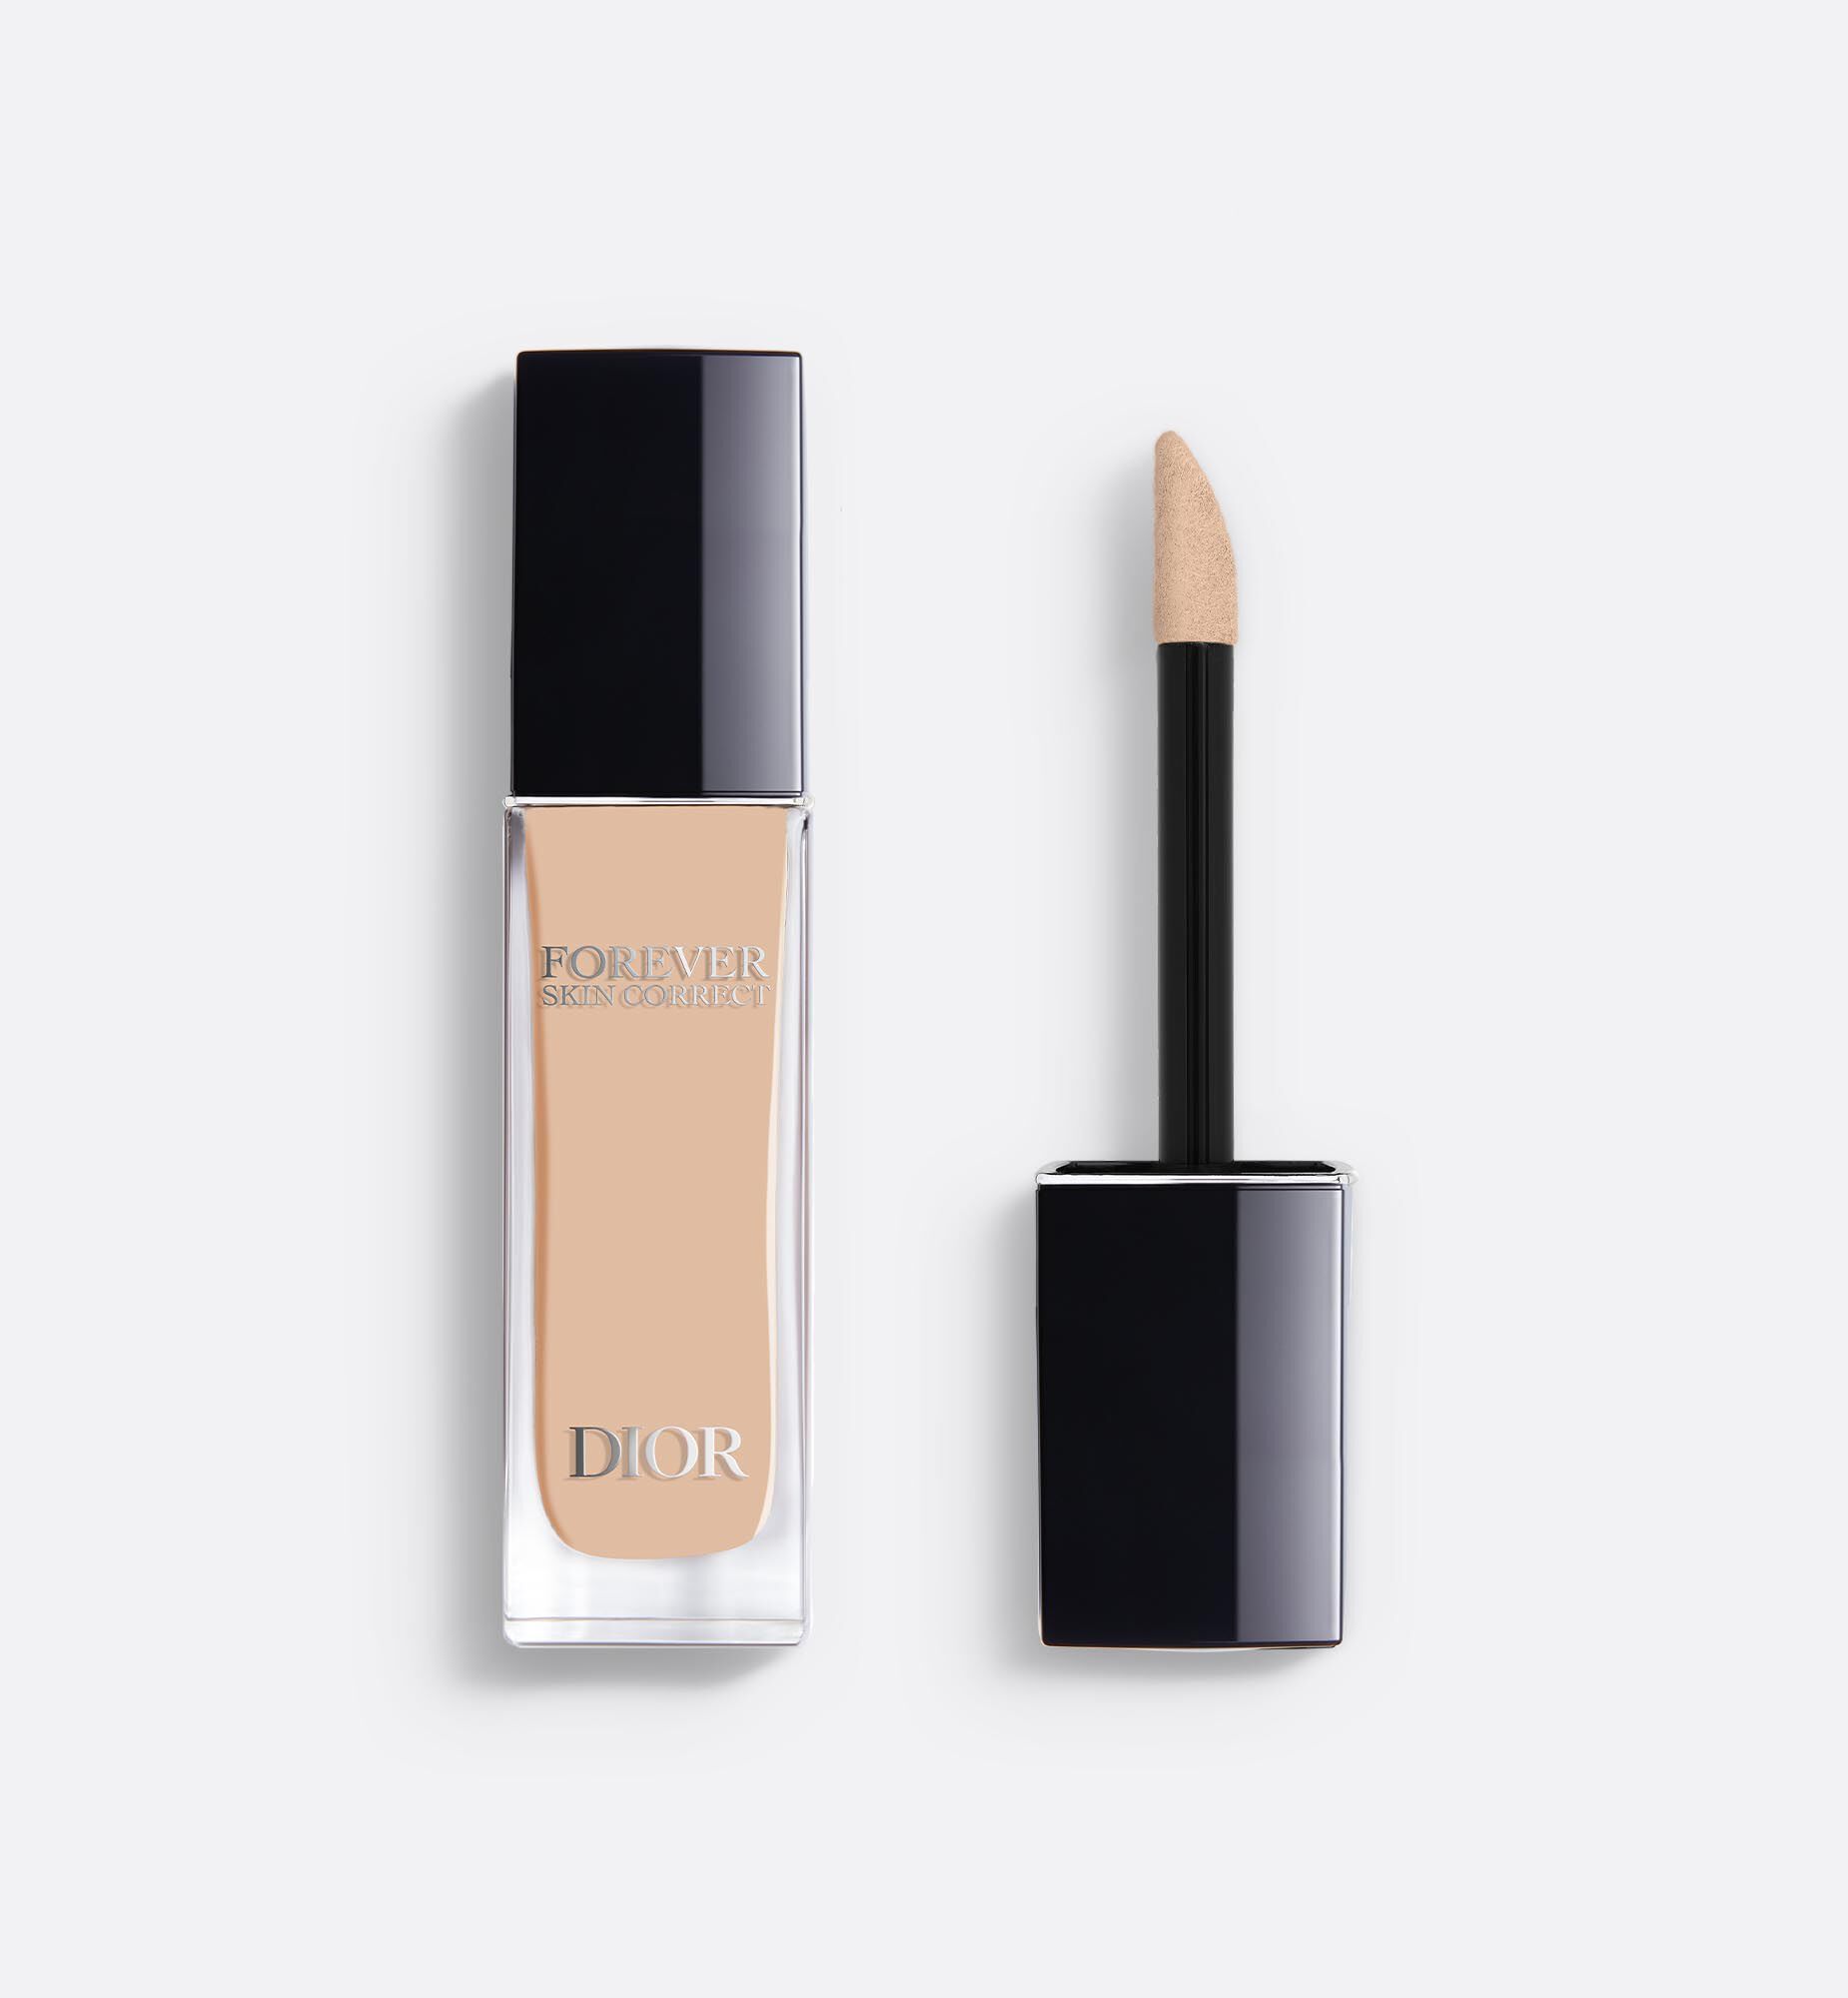 Dior Forever Skin Correct Concealer Review  Swatches